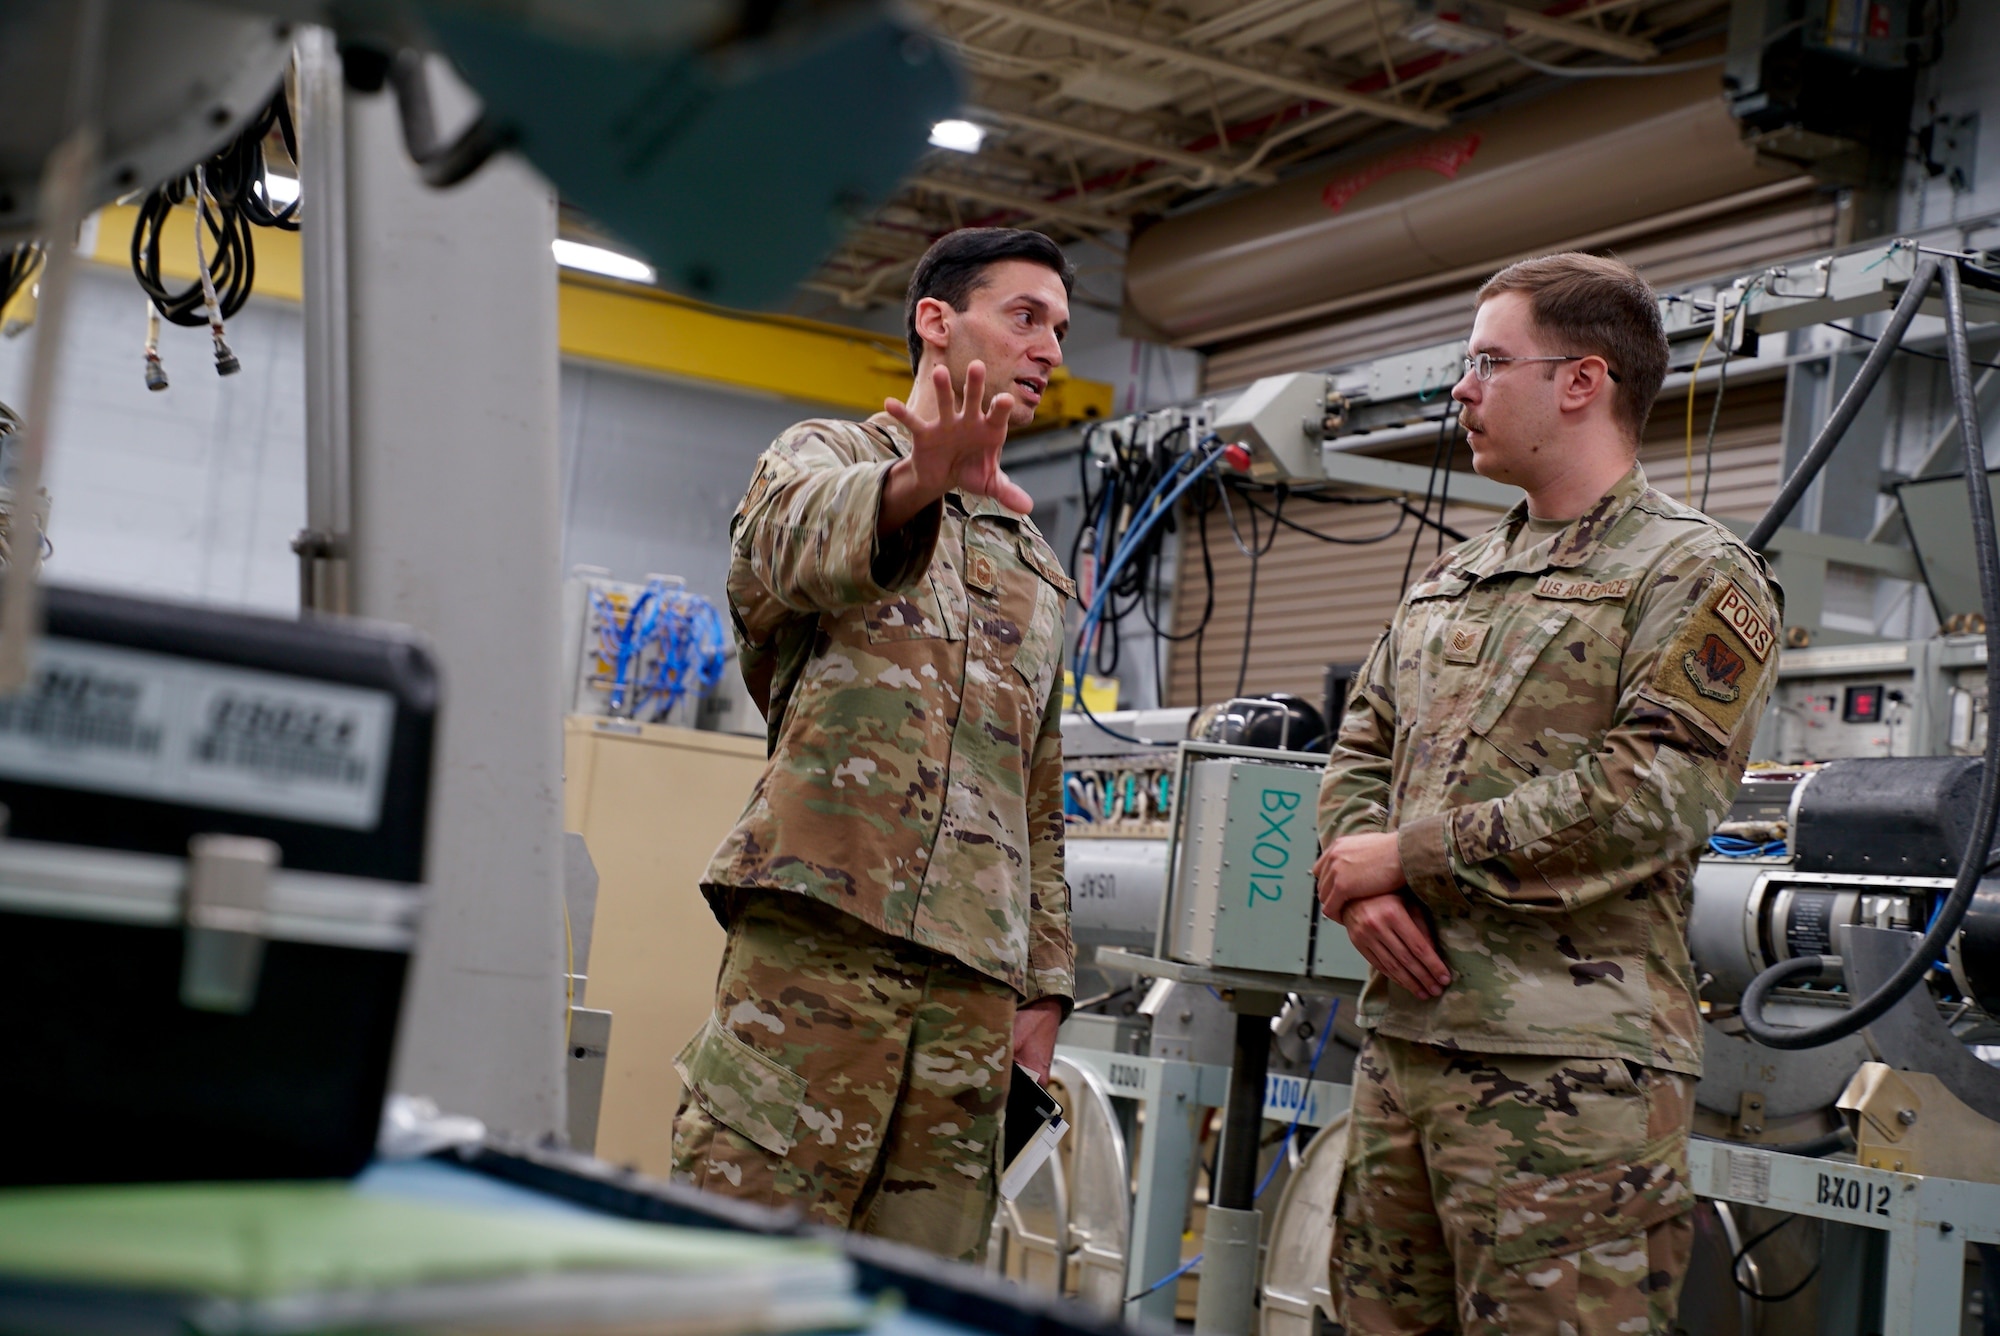 U.S. Air Force Chief Master Sgt. Israel Jaeger, senior enlisted advisor for intelligence, surveillance, reconnaissance, and cyber effects operations, talks with Tech. Sgt. Garrett Fox, 36th Electronic Warfare Squadron pod maintenance NCOIC, about the mission of the Pod Shop at Eglin Air Base, Fla., Feb. 1, 2023. Jaeger was part of a wing visit to the 350th Spectrum Warfare Wing and during his visit to the Pod Shop, learned how the pods use the Electromagnetic Spectrum to jam, deny, and deceive enemy radar systems to effectively protect aircraft from radar guided missiles. (U.S. Air Force photo by 1st Lt. Benjamin Aronson)